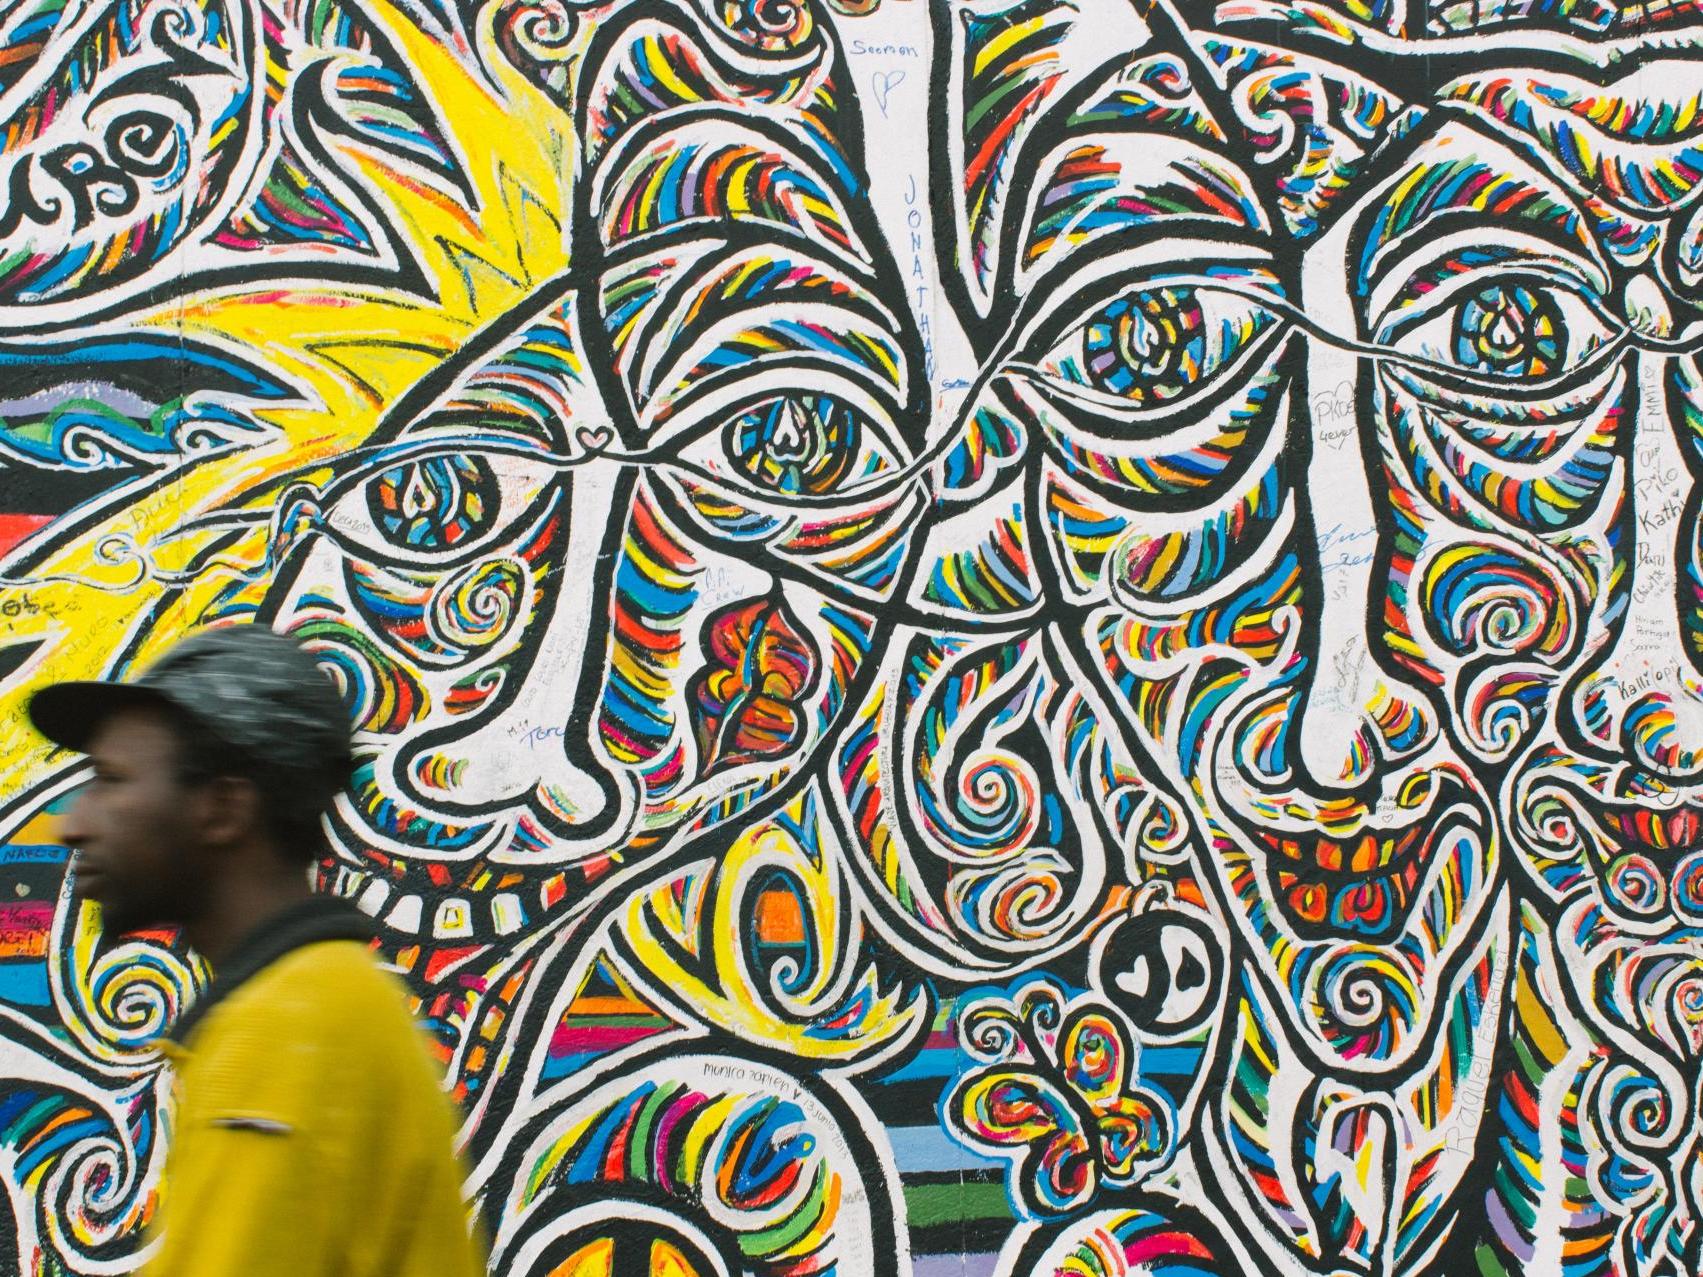 Man walking in front of a mural